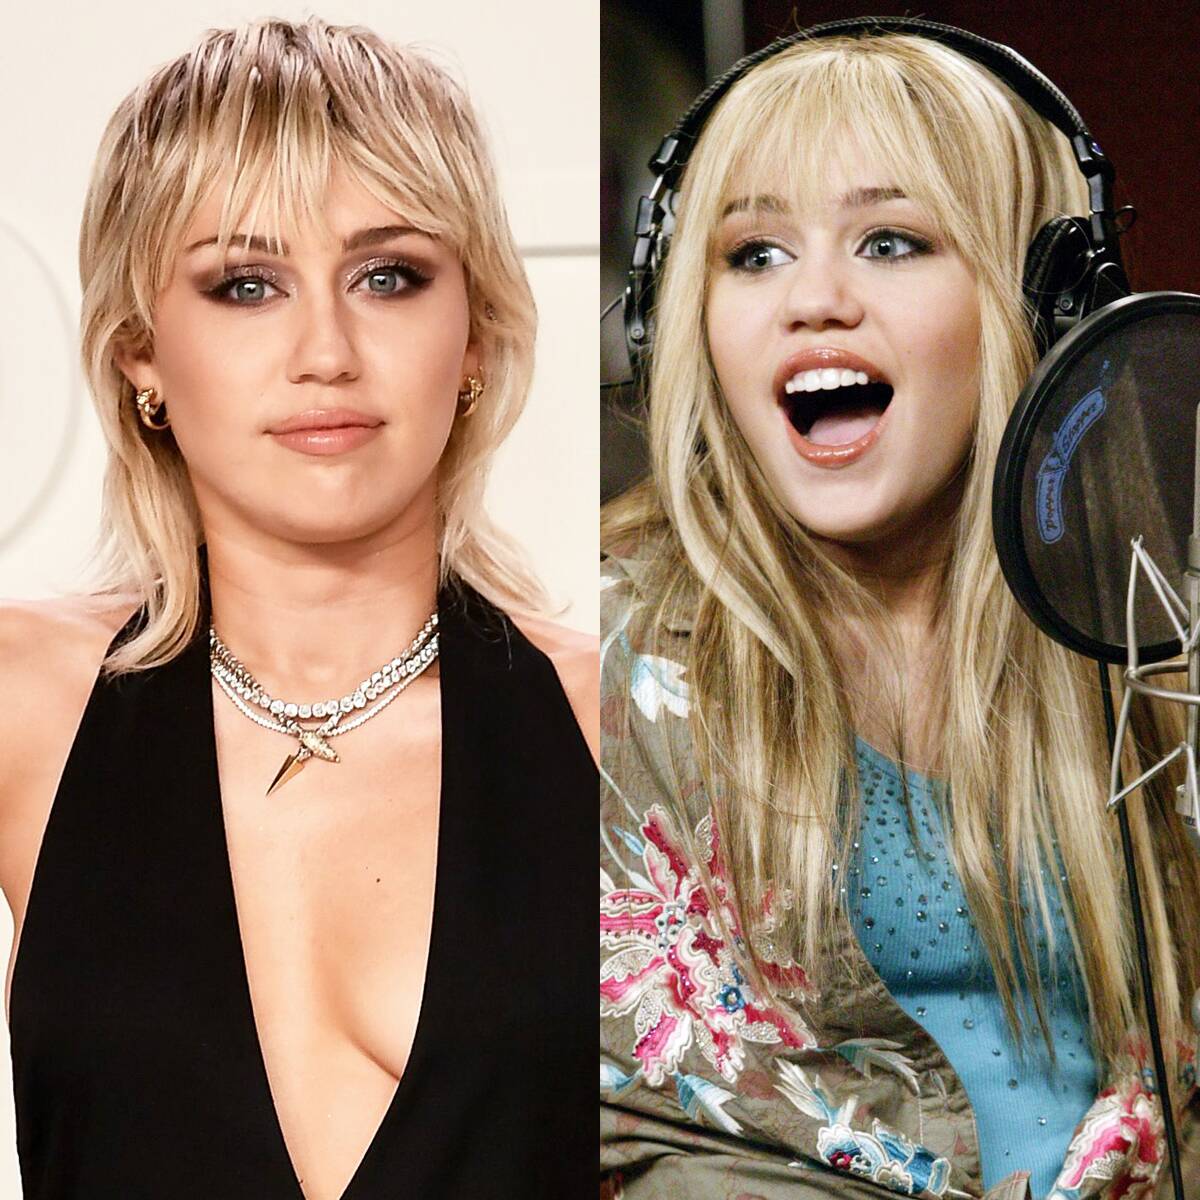 Miley Cyrus Details Her “Identity Crisis” Following Hannah Montana